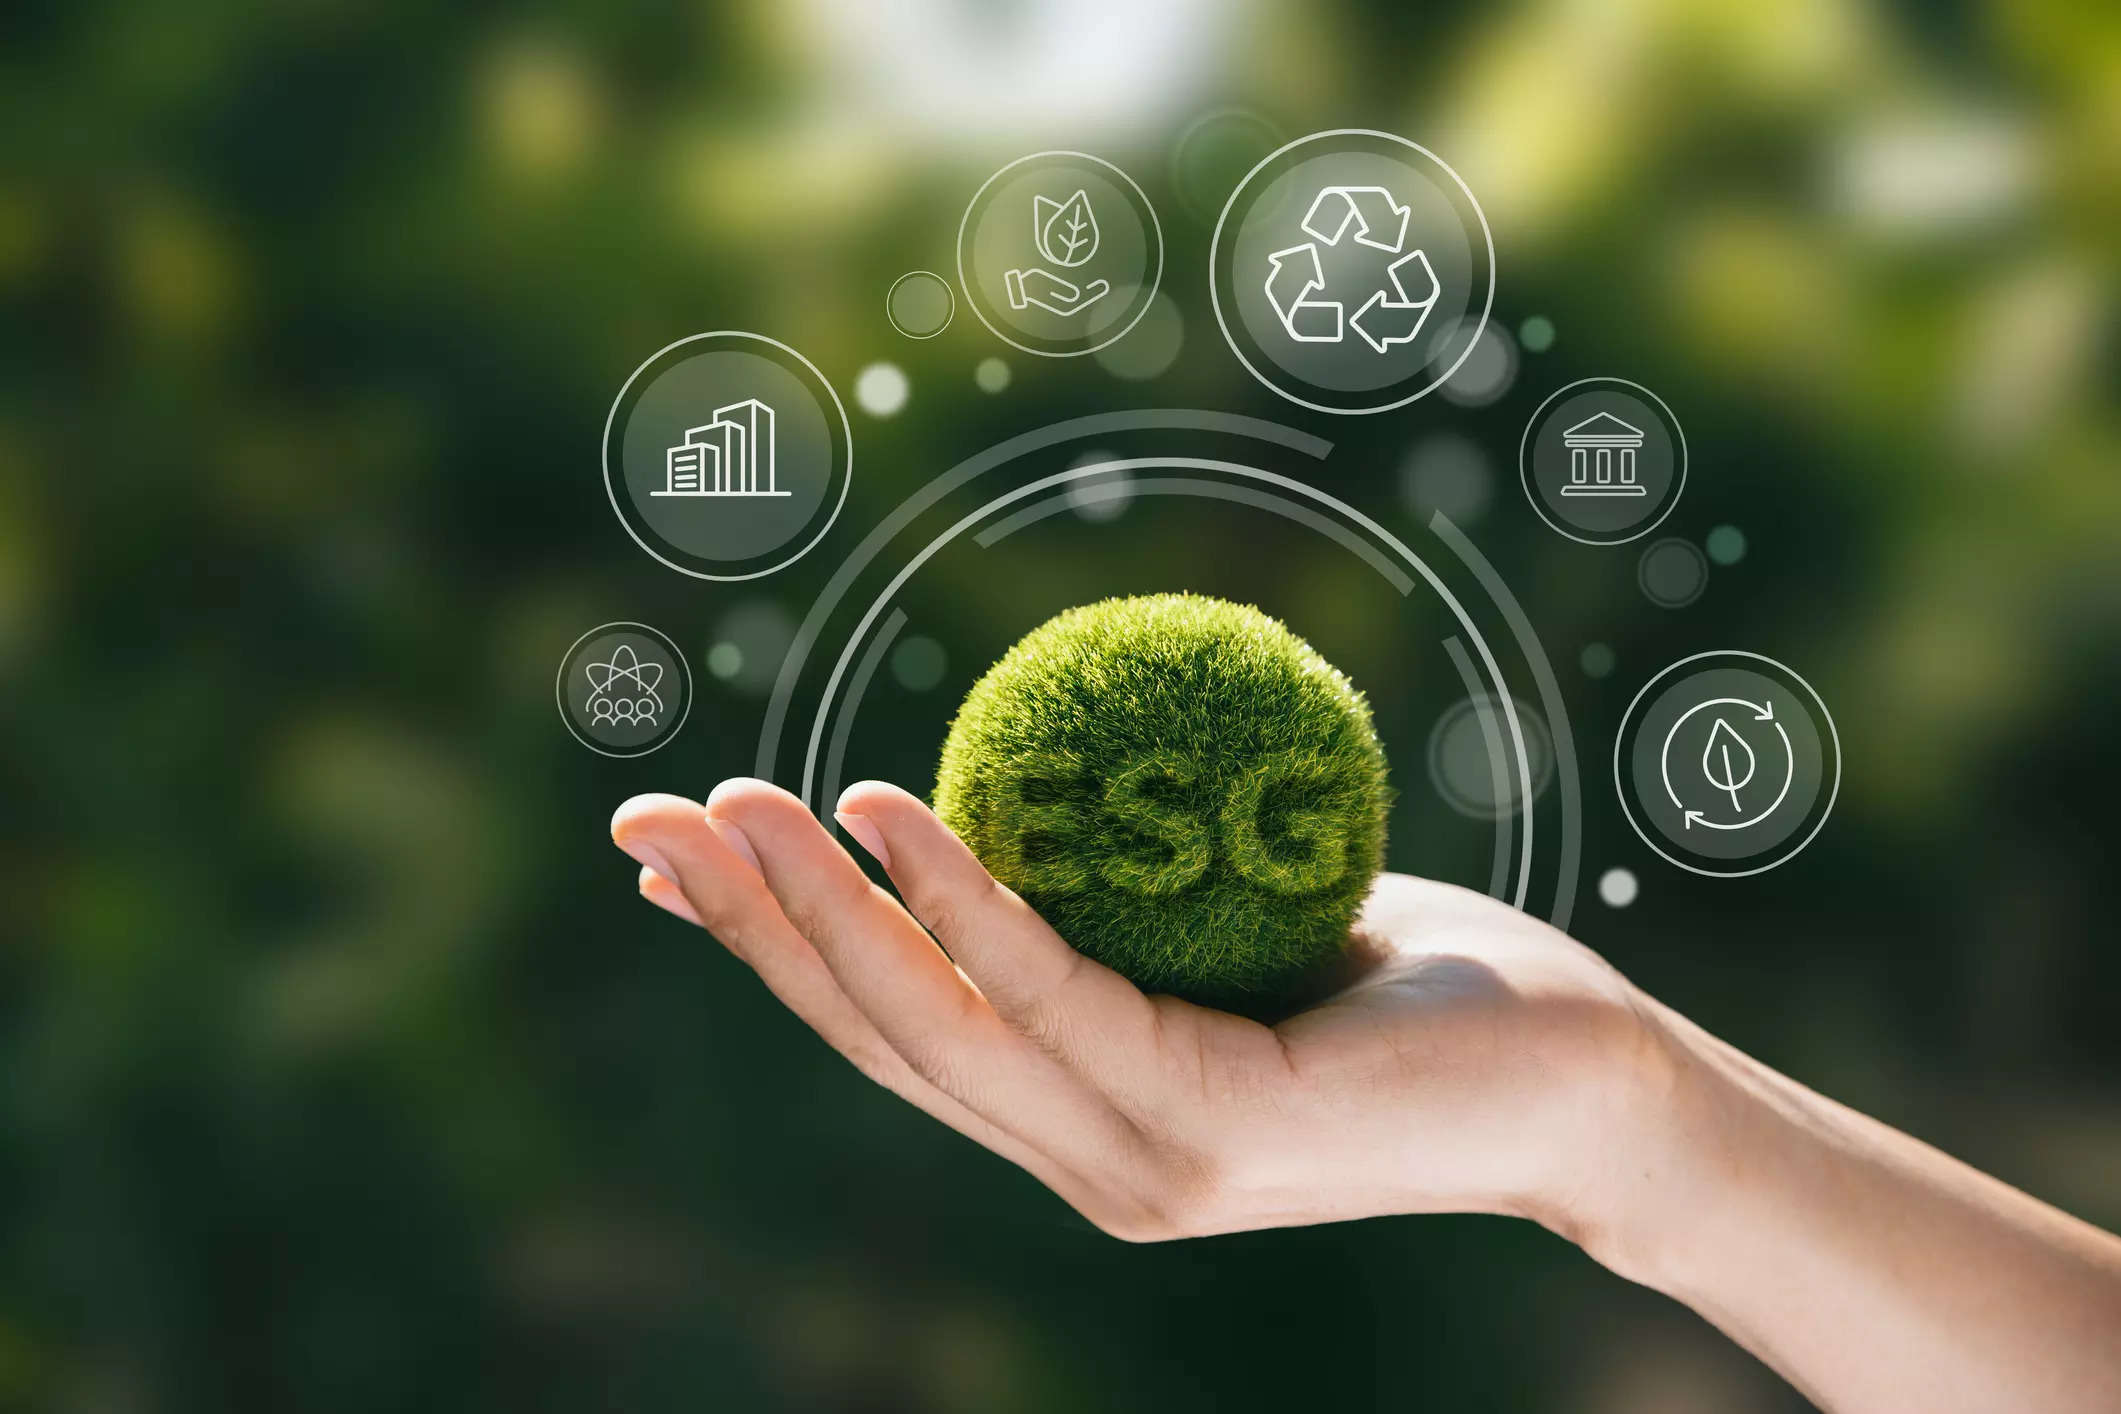 72% financial institutions to invest in ESG tech: Survey by BCT Digital and Chartis Research 